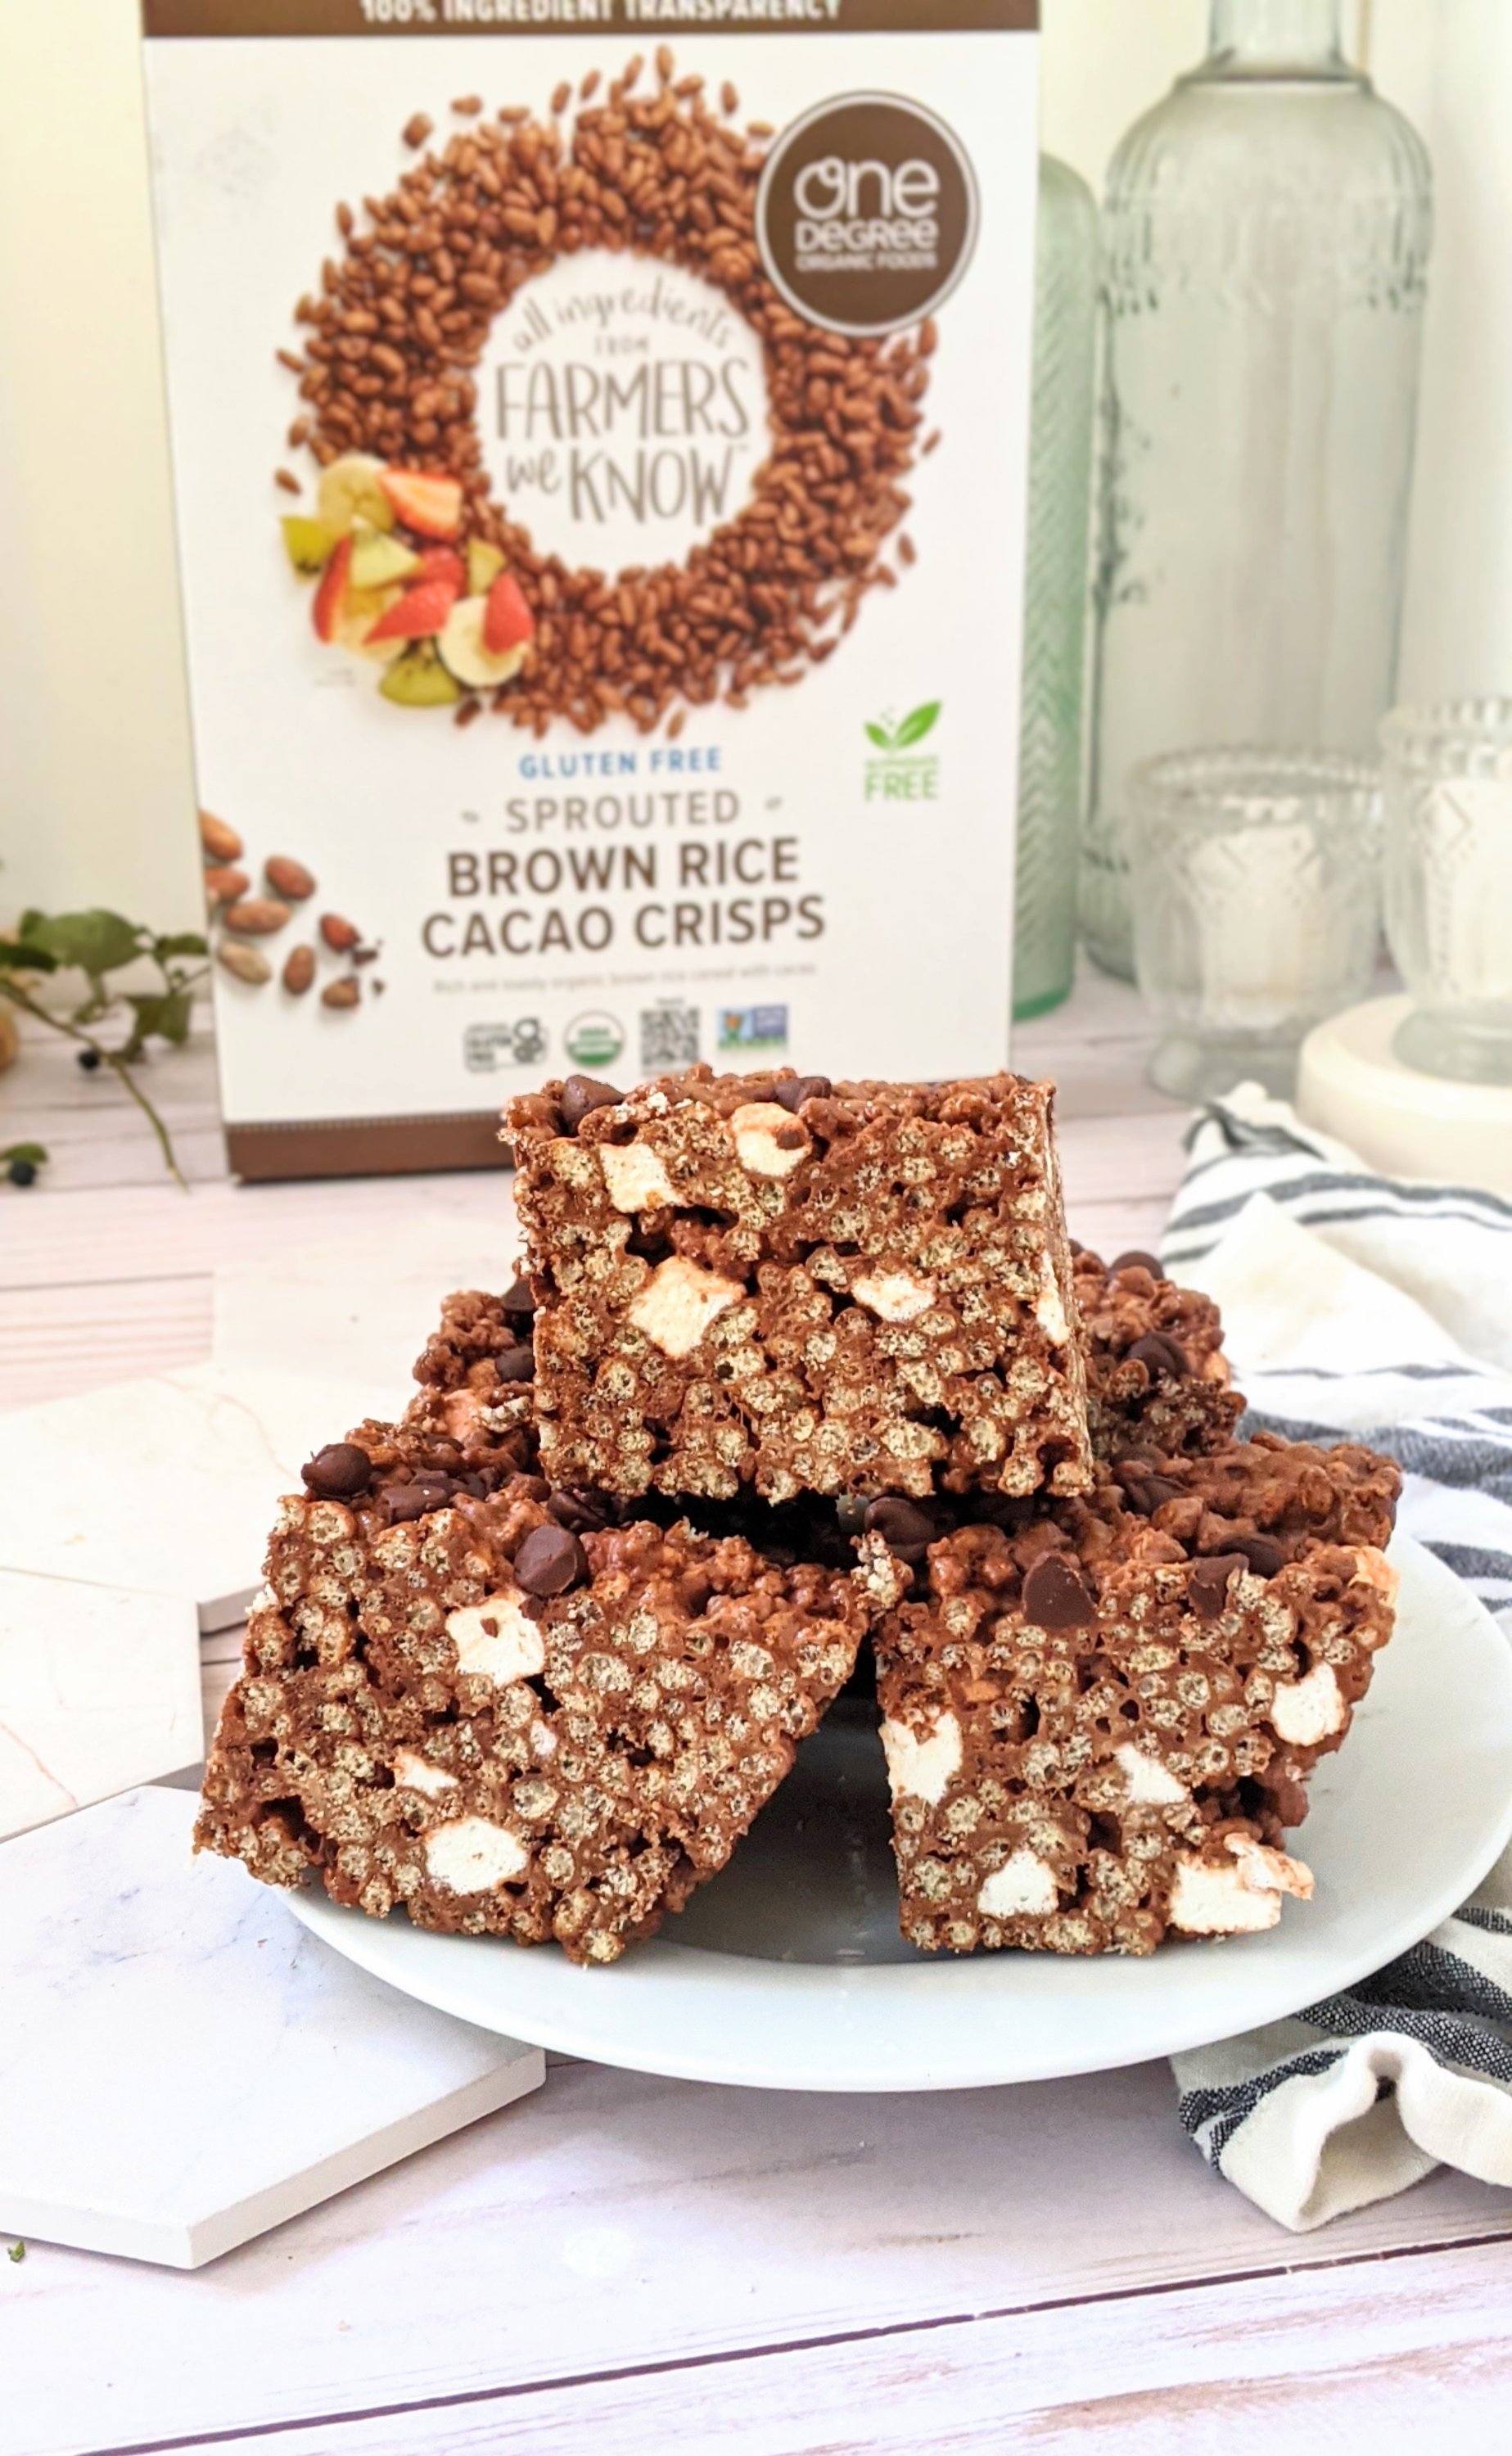 chocolate rice crispy treats recipe with cacao powder cocoa powder brown rice krispie treats cereal and chocolate chips healthy plant based vegan summer snacks for dessert or picnics beach day treats